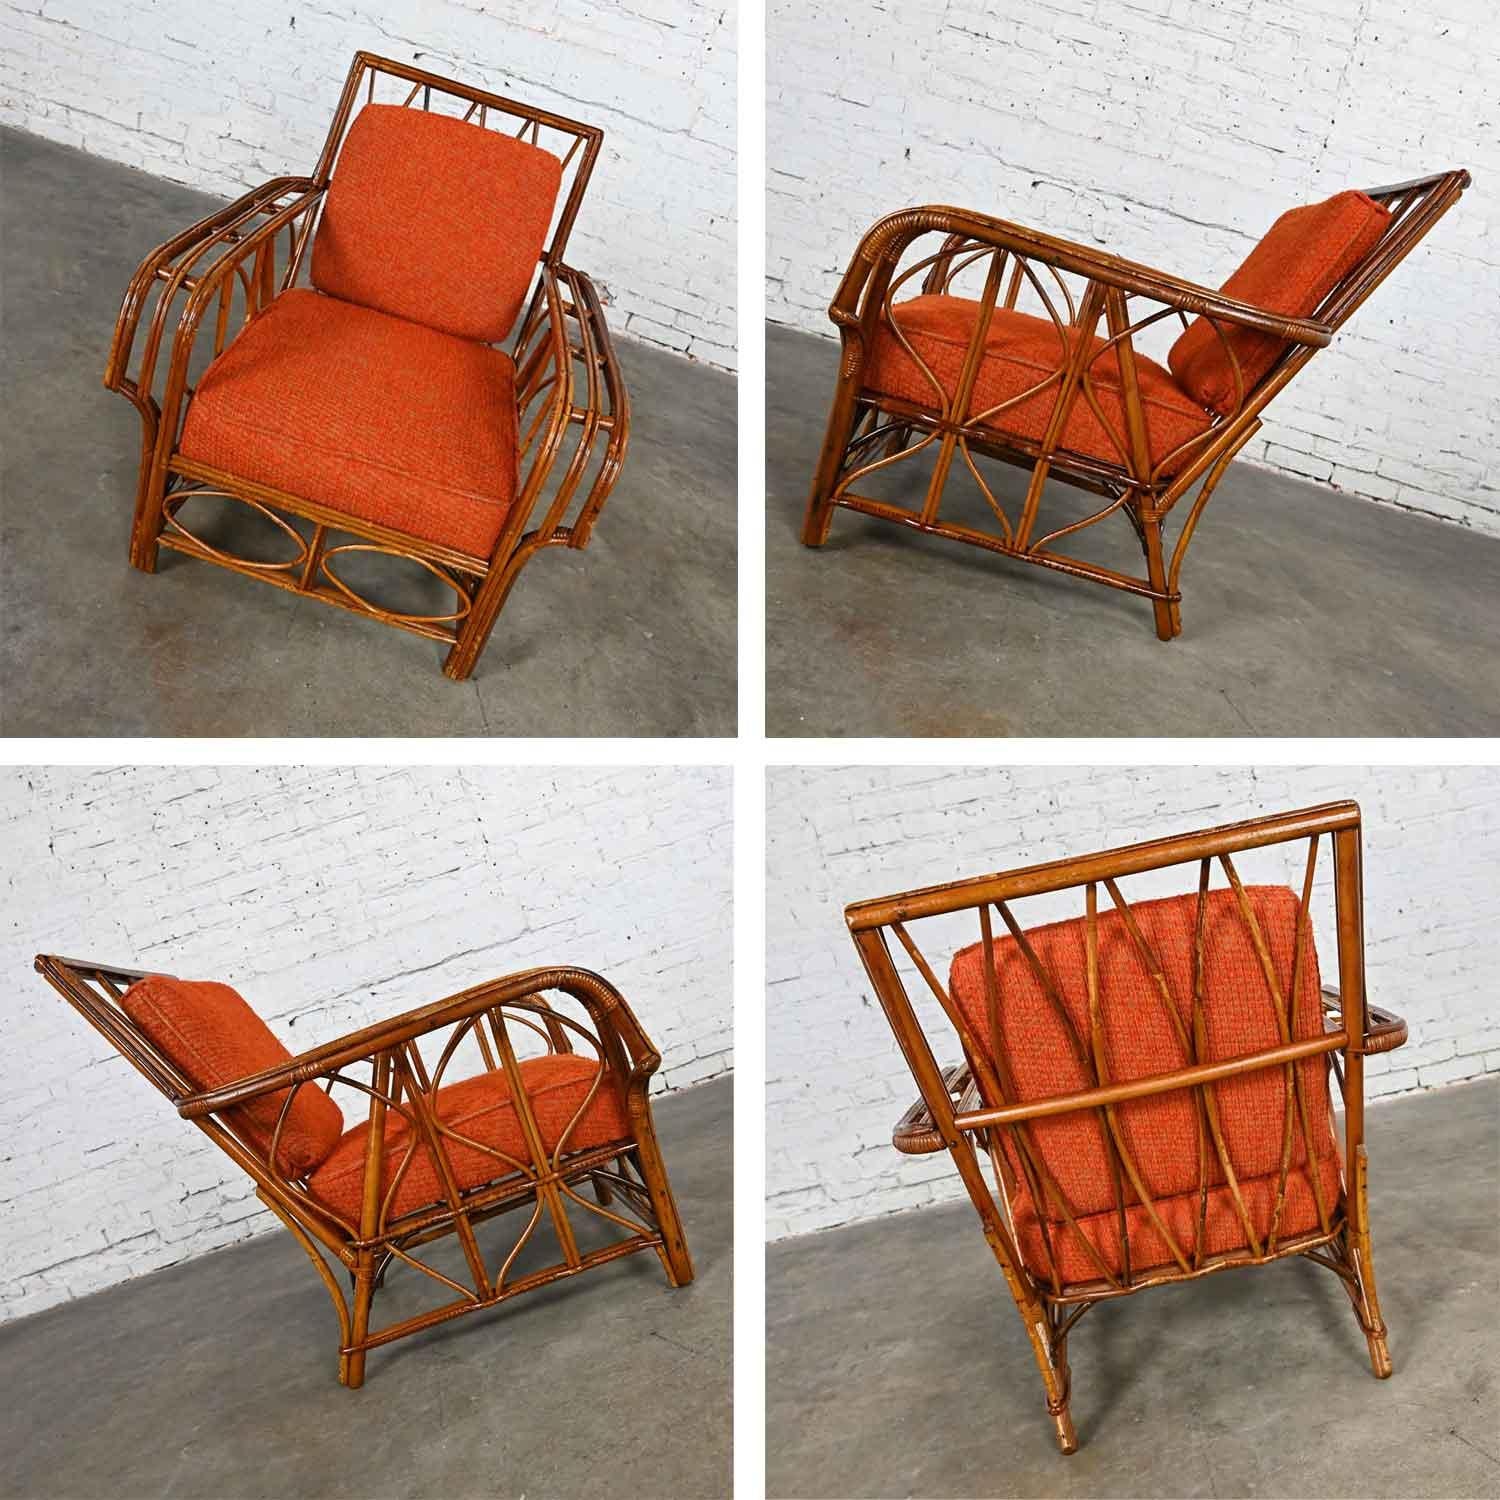 Rattan Lounge Chair & Ottoman Orange Fabric Cushions by Helmers Manufacturing Co 5